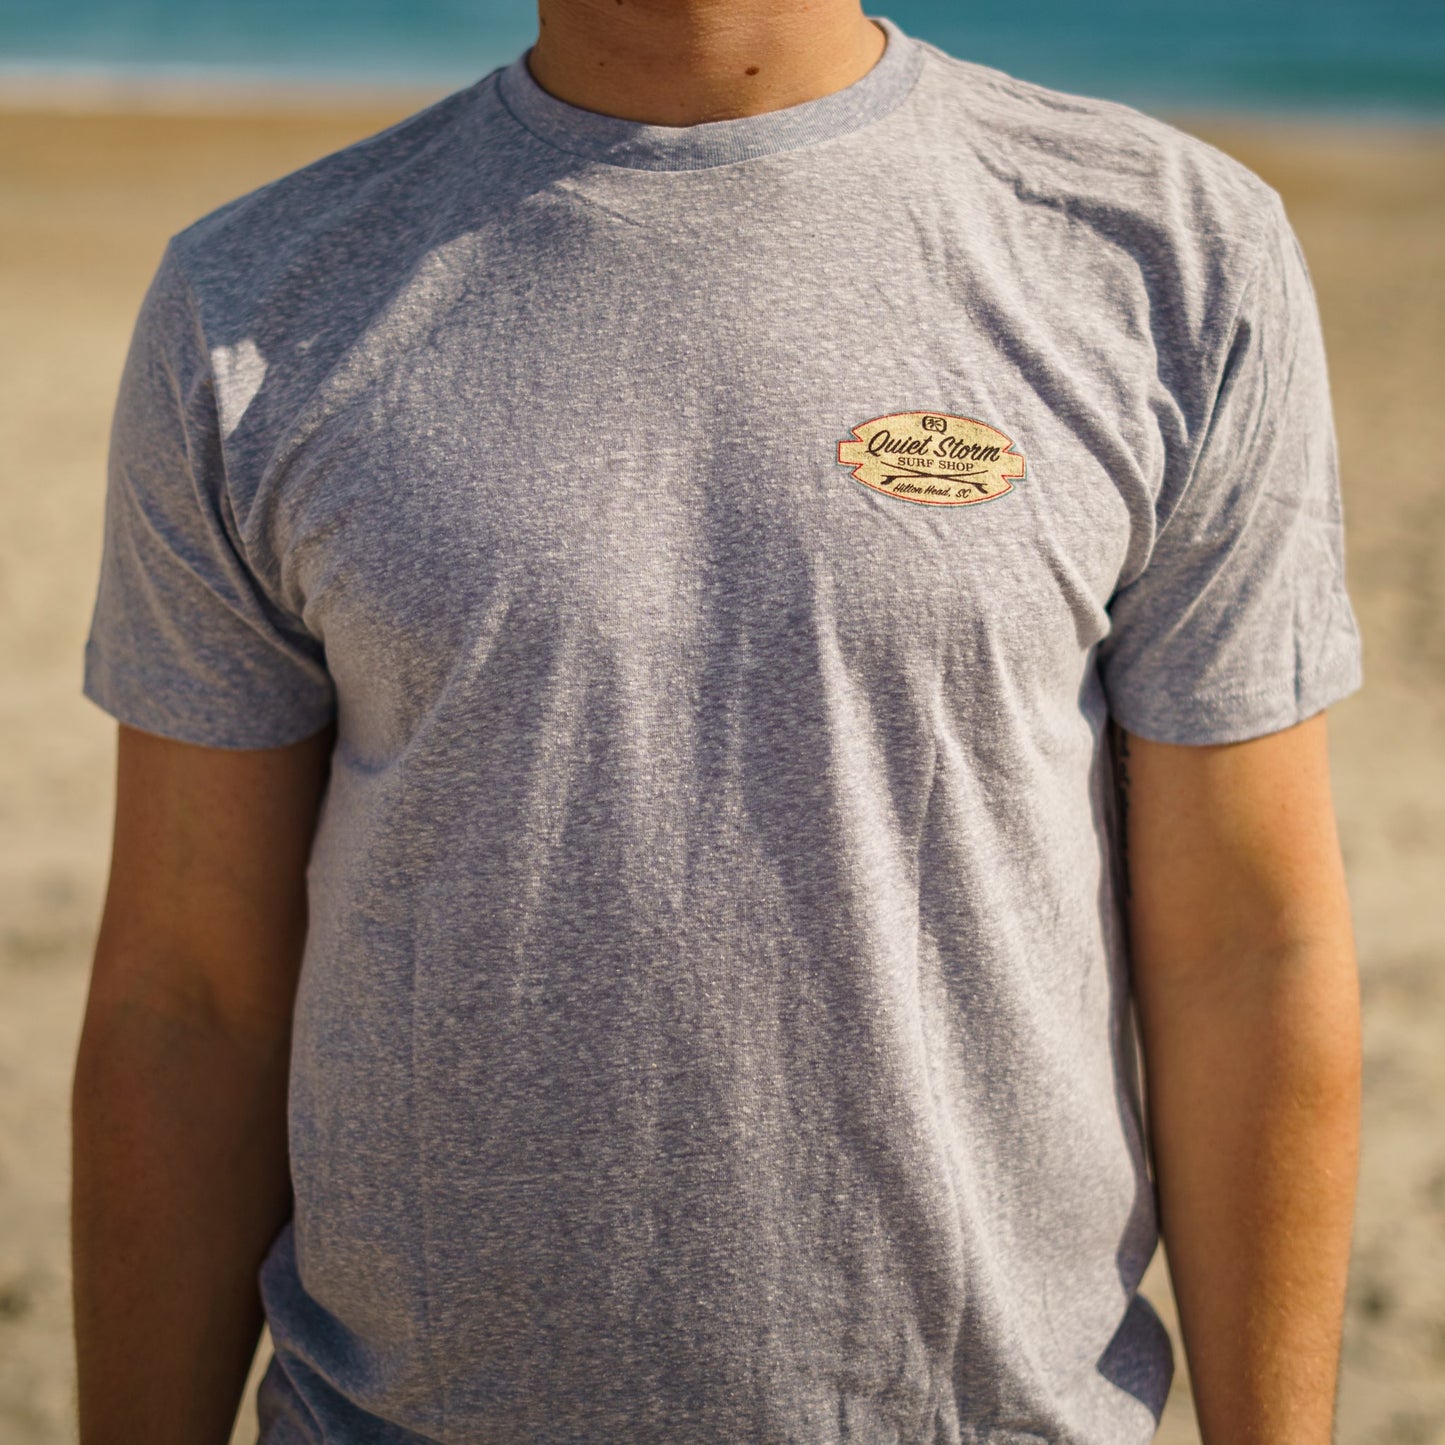 Man at beach wearing a graphic tee showing front of shirt with small design on top corner of shirt that says Quiet Storm surf shop and below has two surf boards crossing and below says Hilton Head,SC